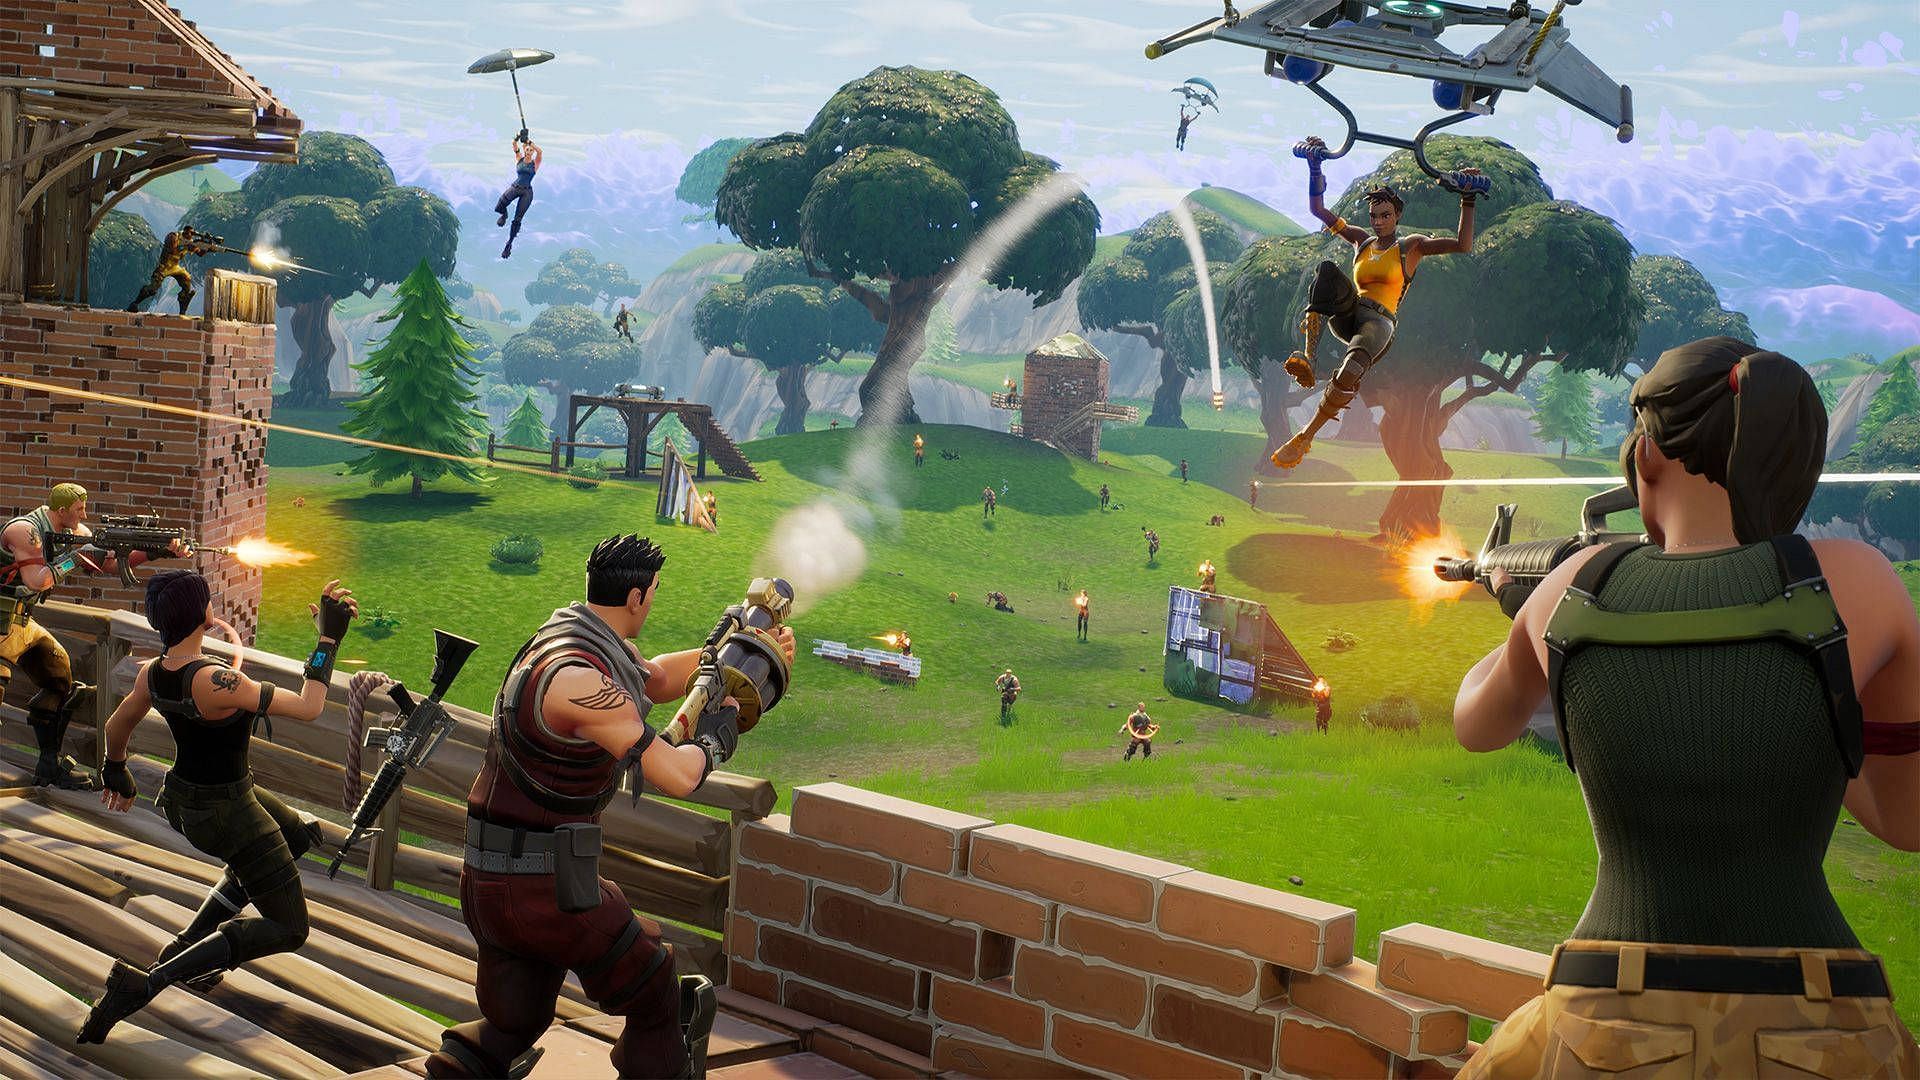 50v50 in Fortnite will now have only 40 players per team. (Image via Epic Games)